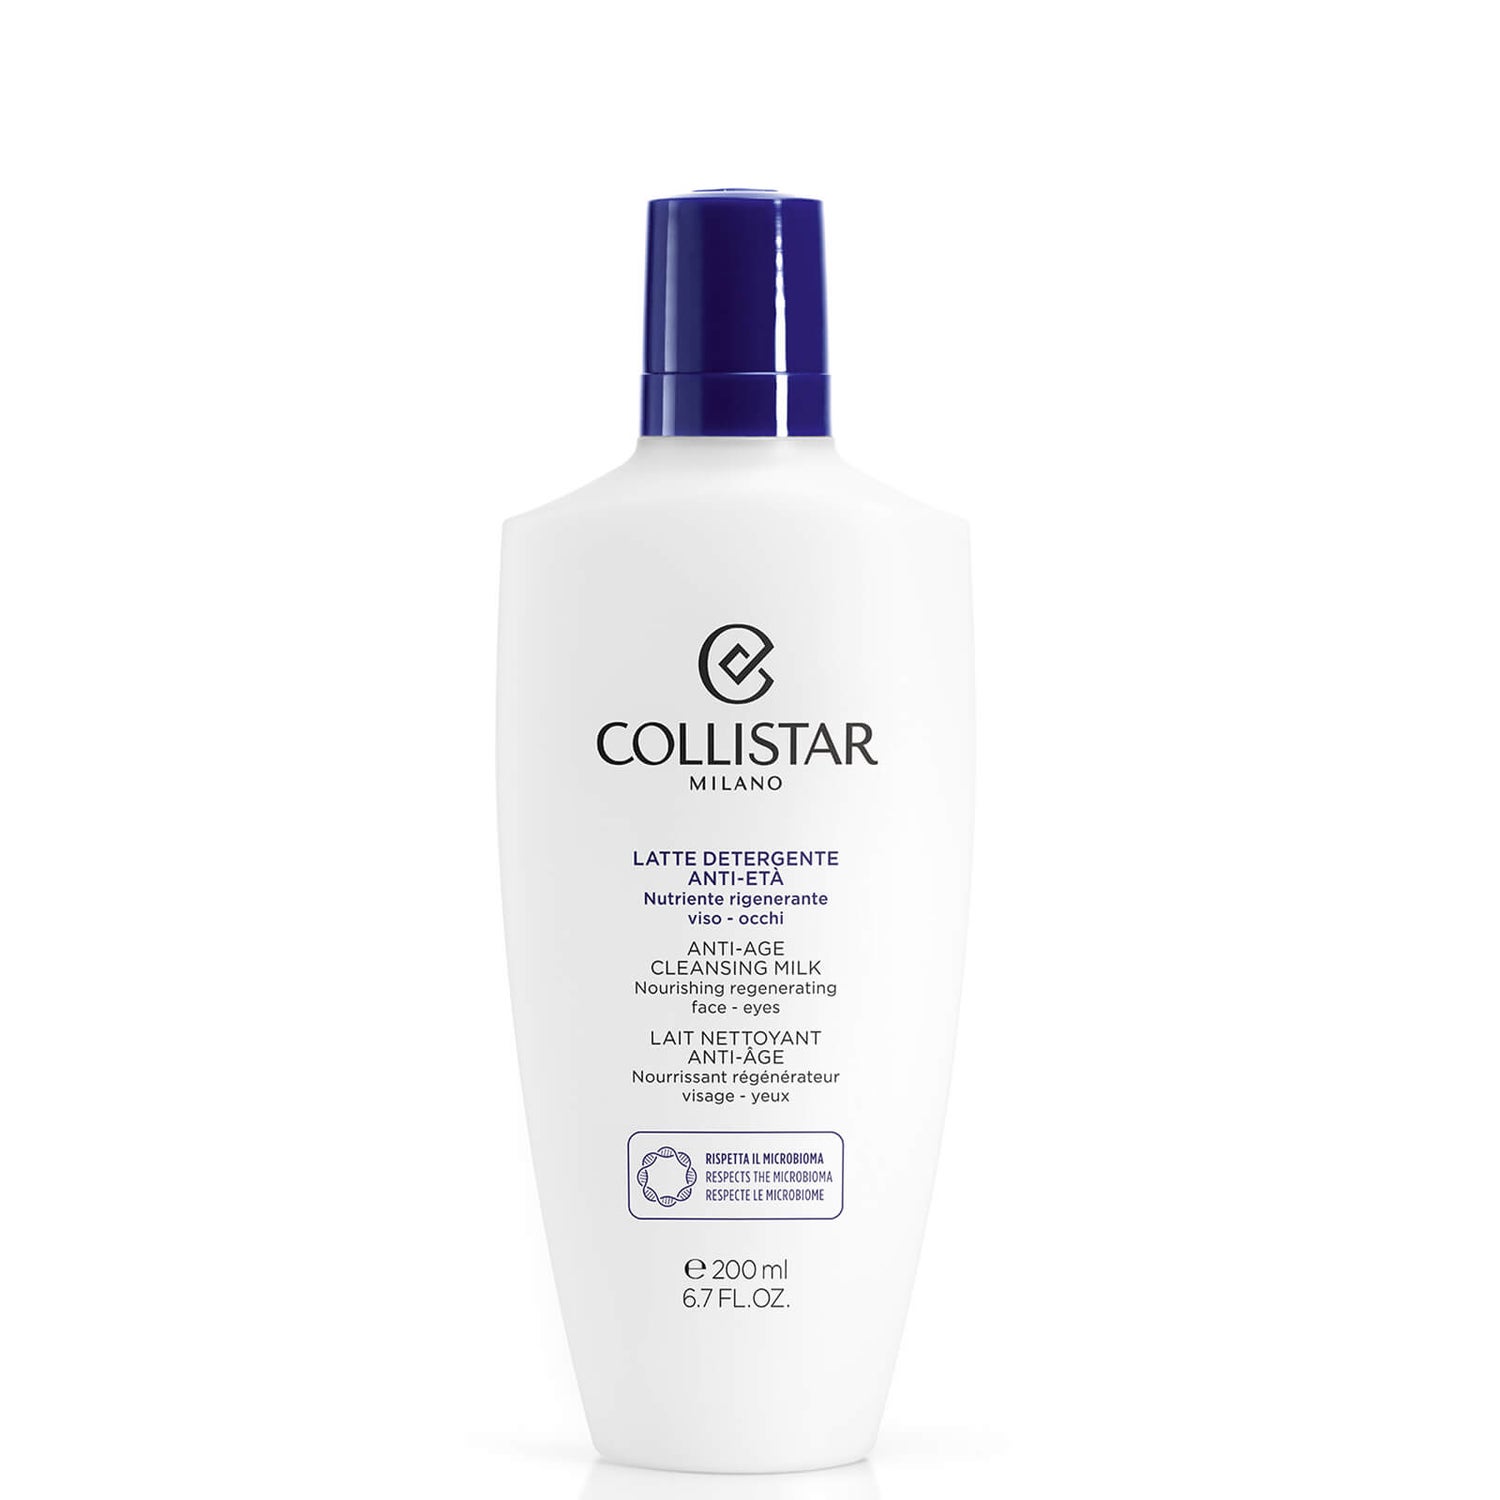 Collistar Anti-Age Cleansing Milk for Face-Eyes 200ml